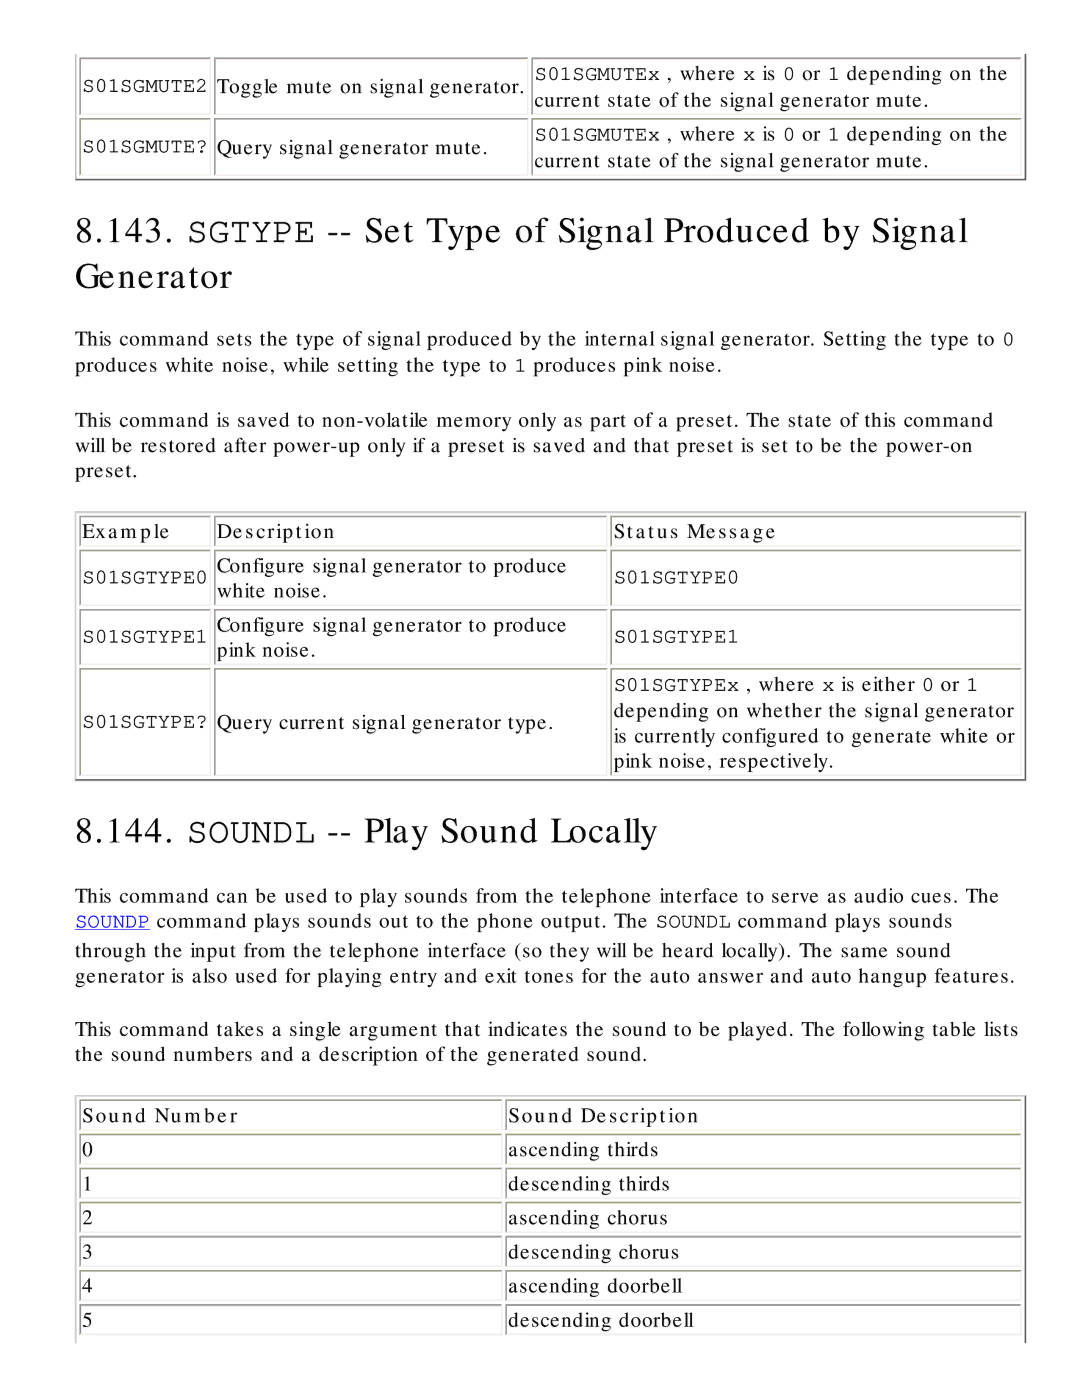 Polycom RS-232 manual Sgtype -- Set Type of Signal Produced by Signal Generator, Soundl -- Play Sound Locally, Sound Number 